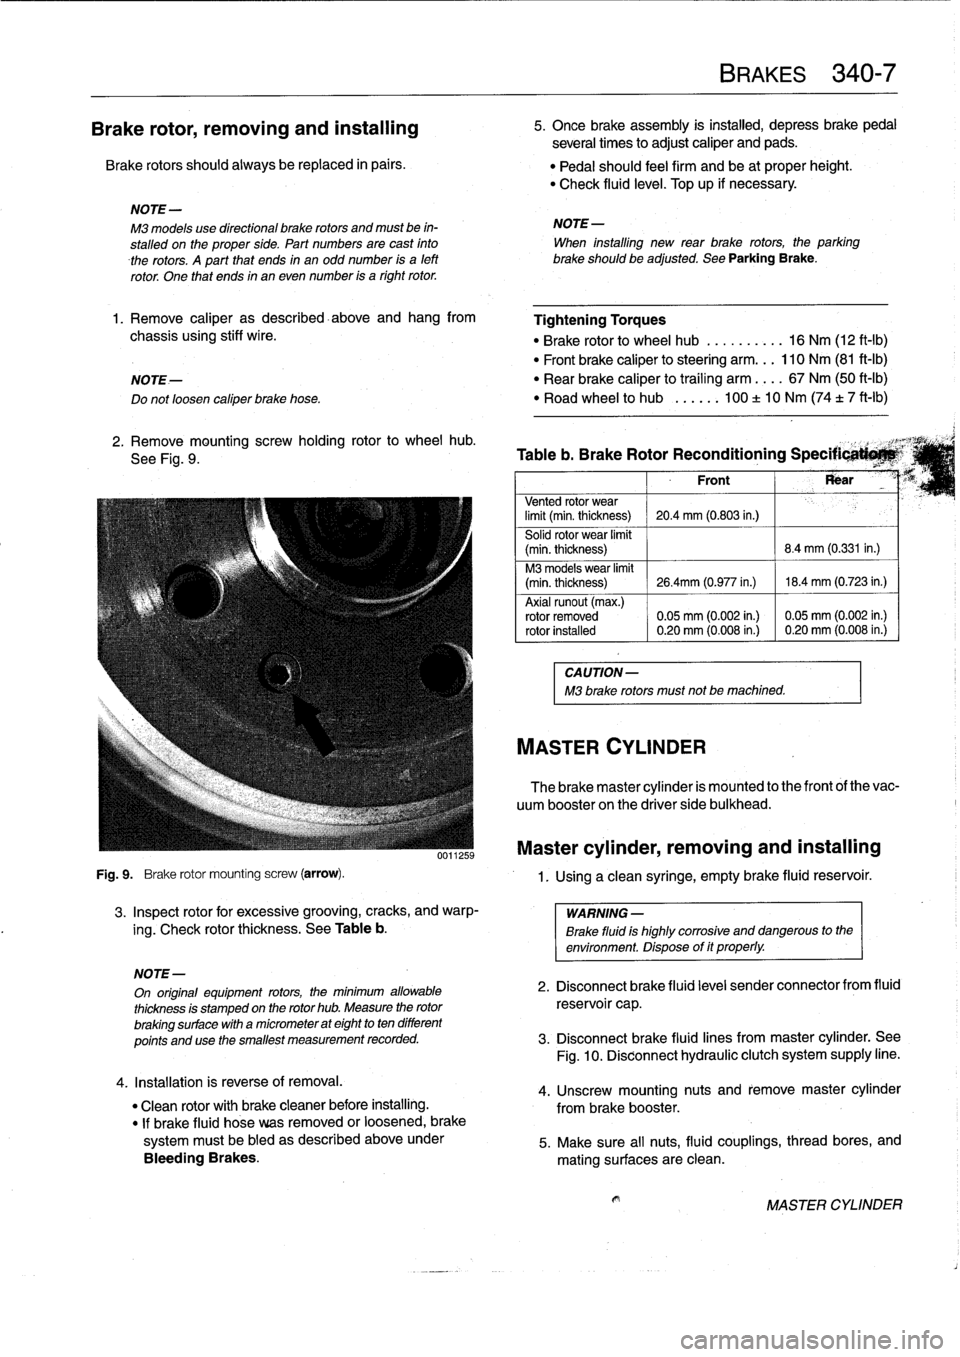 BMW 318i 1997 E36 Workshop Manual 
Brake
rotor,
removing
and
installing

Brake
rotors
shouldalways
be
replaced
in
pairs
.

Fig
.
9
.

	

Brake
rotor
mounting
screw
(arrow)
.

3
.
Inspect
rotor
for
excessive
grooving,
cracks,
and
warp-